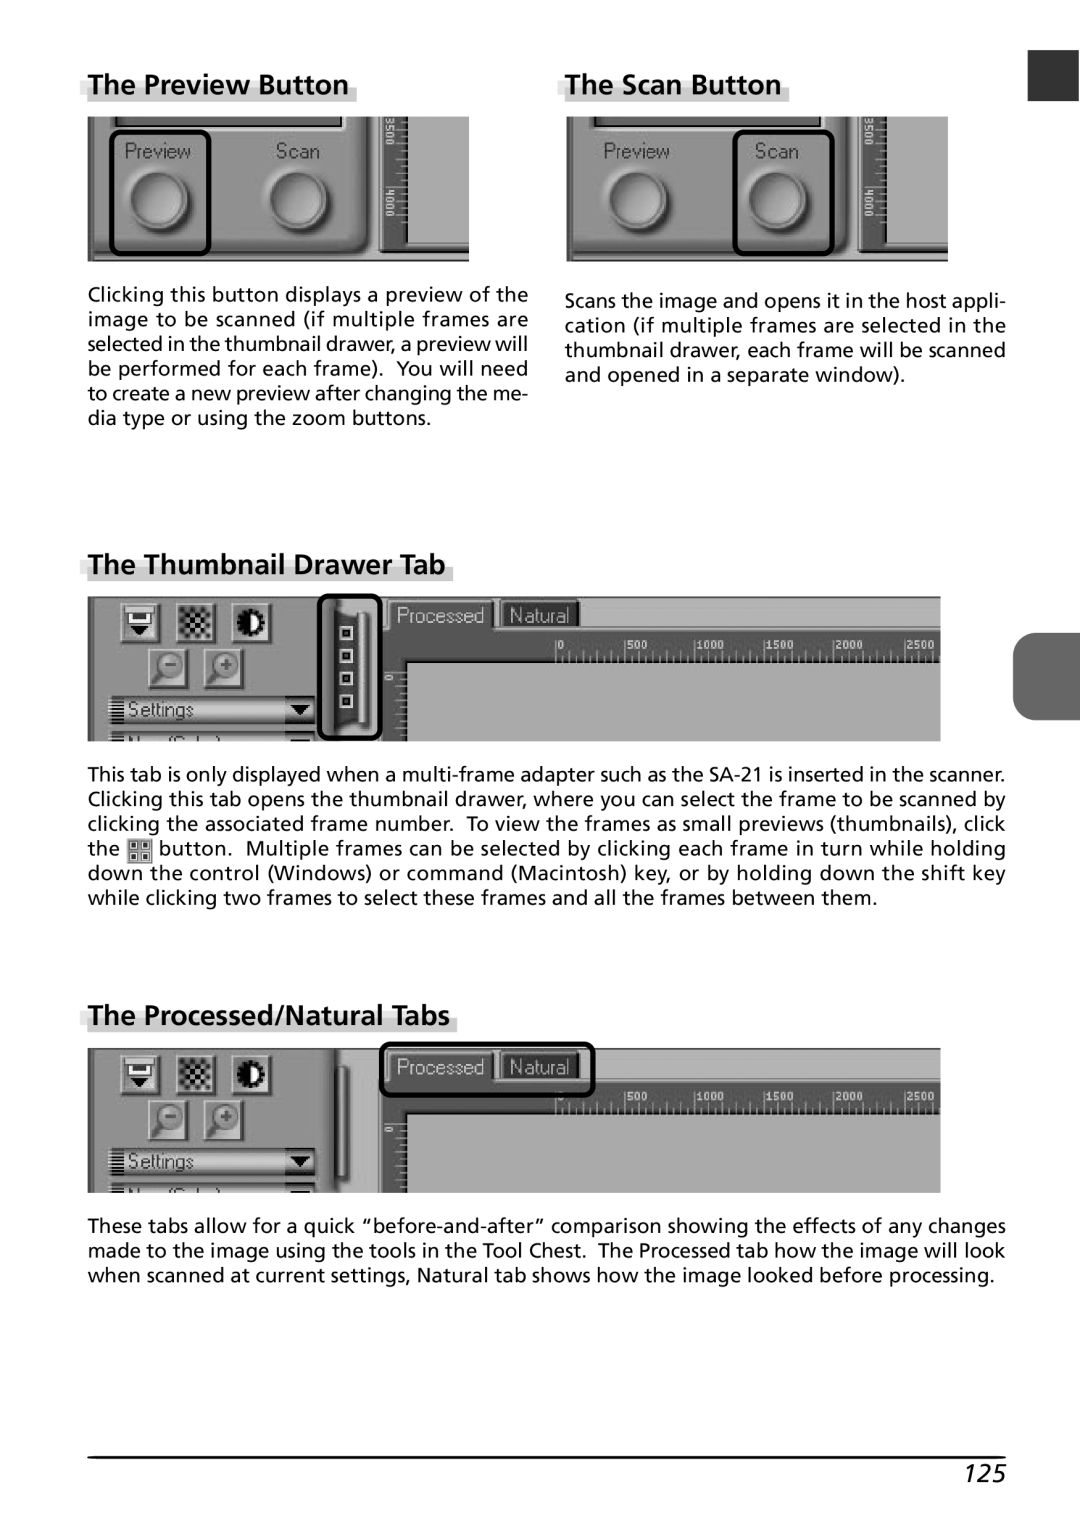 Nikon LS4000 user manual The Preview Button, The Thumbnail Drawer Tab, The Processed/Natural Tabs, The Scan Button 